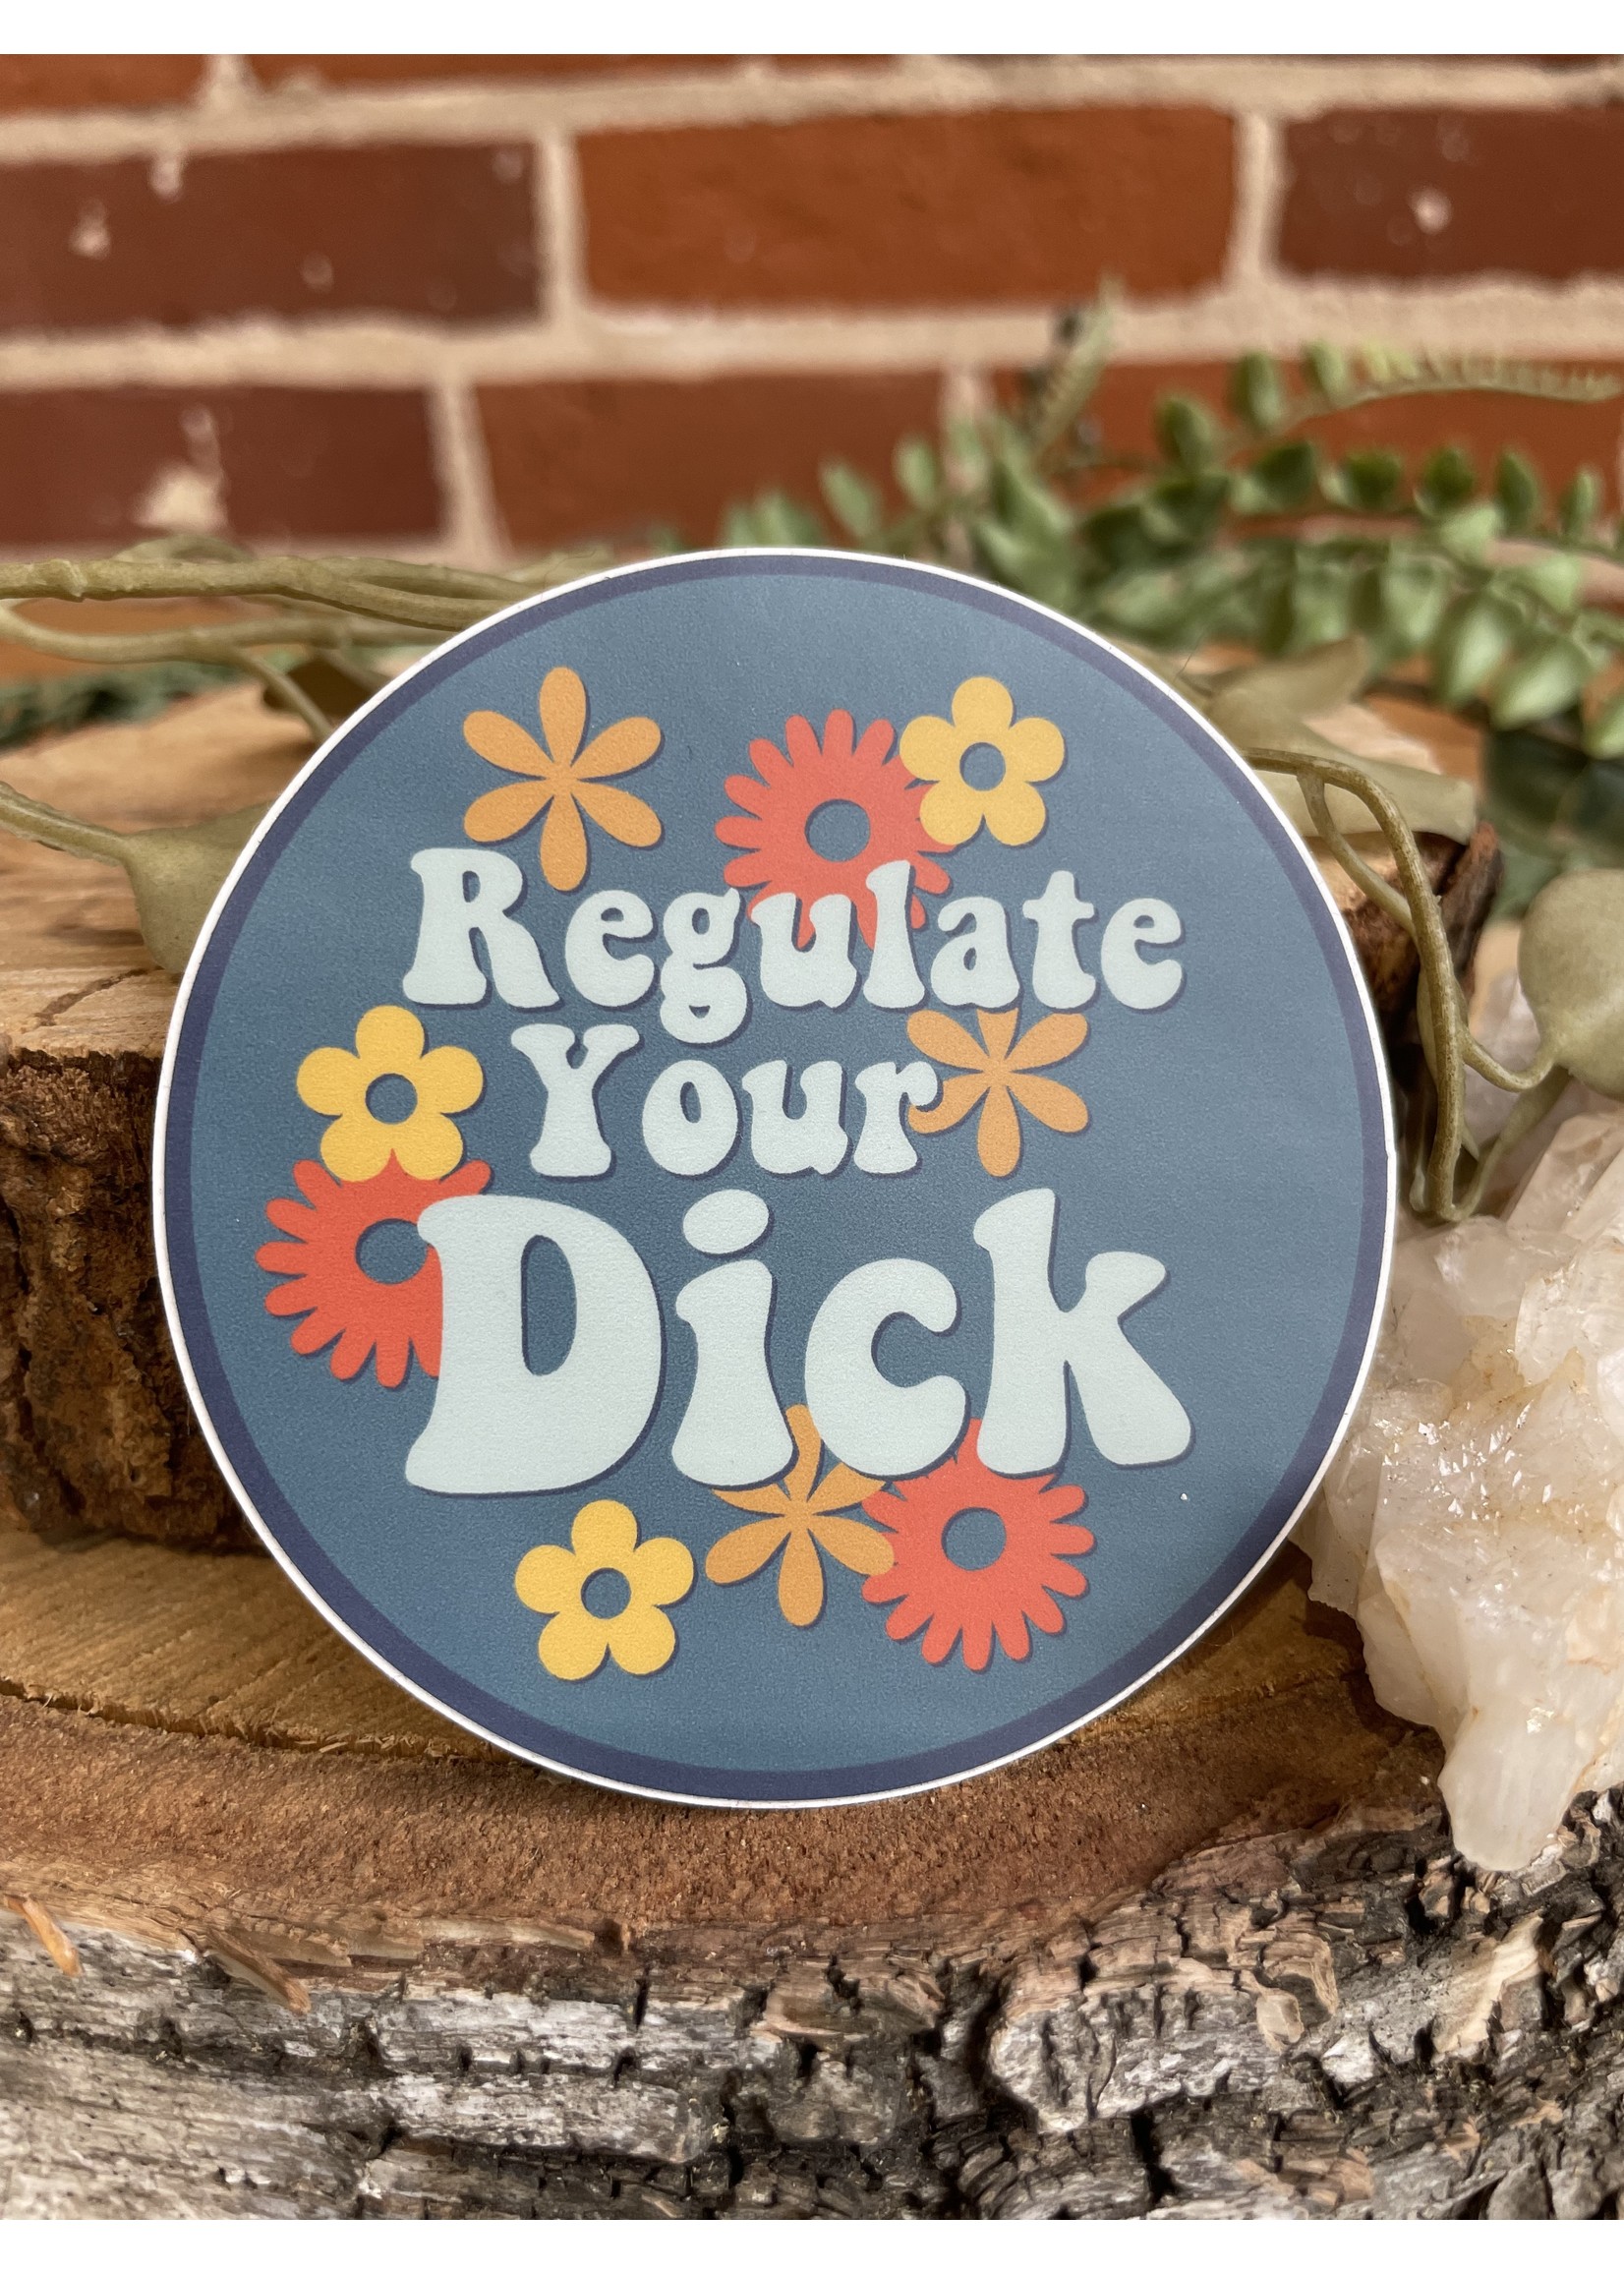 Tangled Up In Hue Wholesale Sticker - Regulate Your Dick